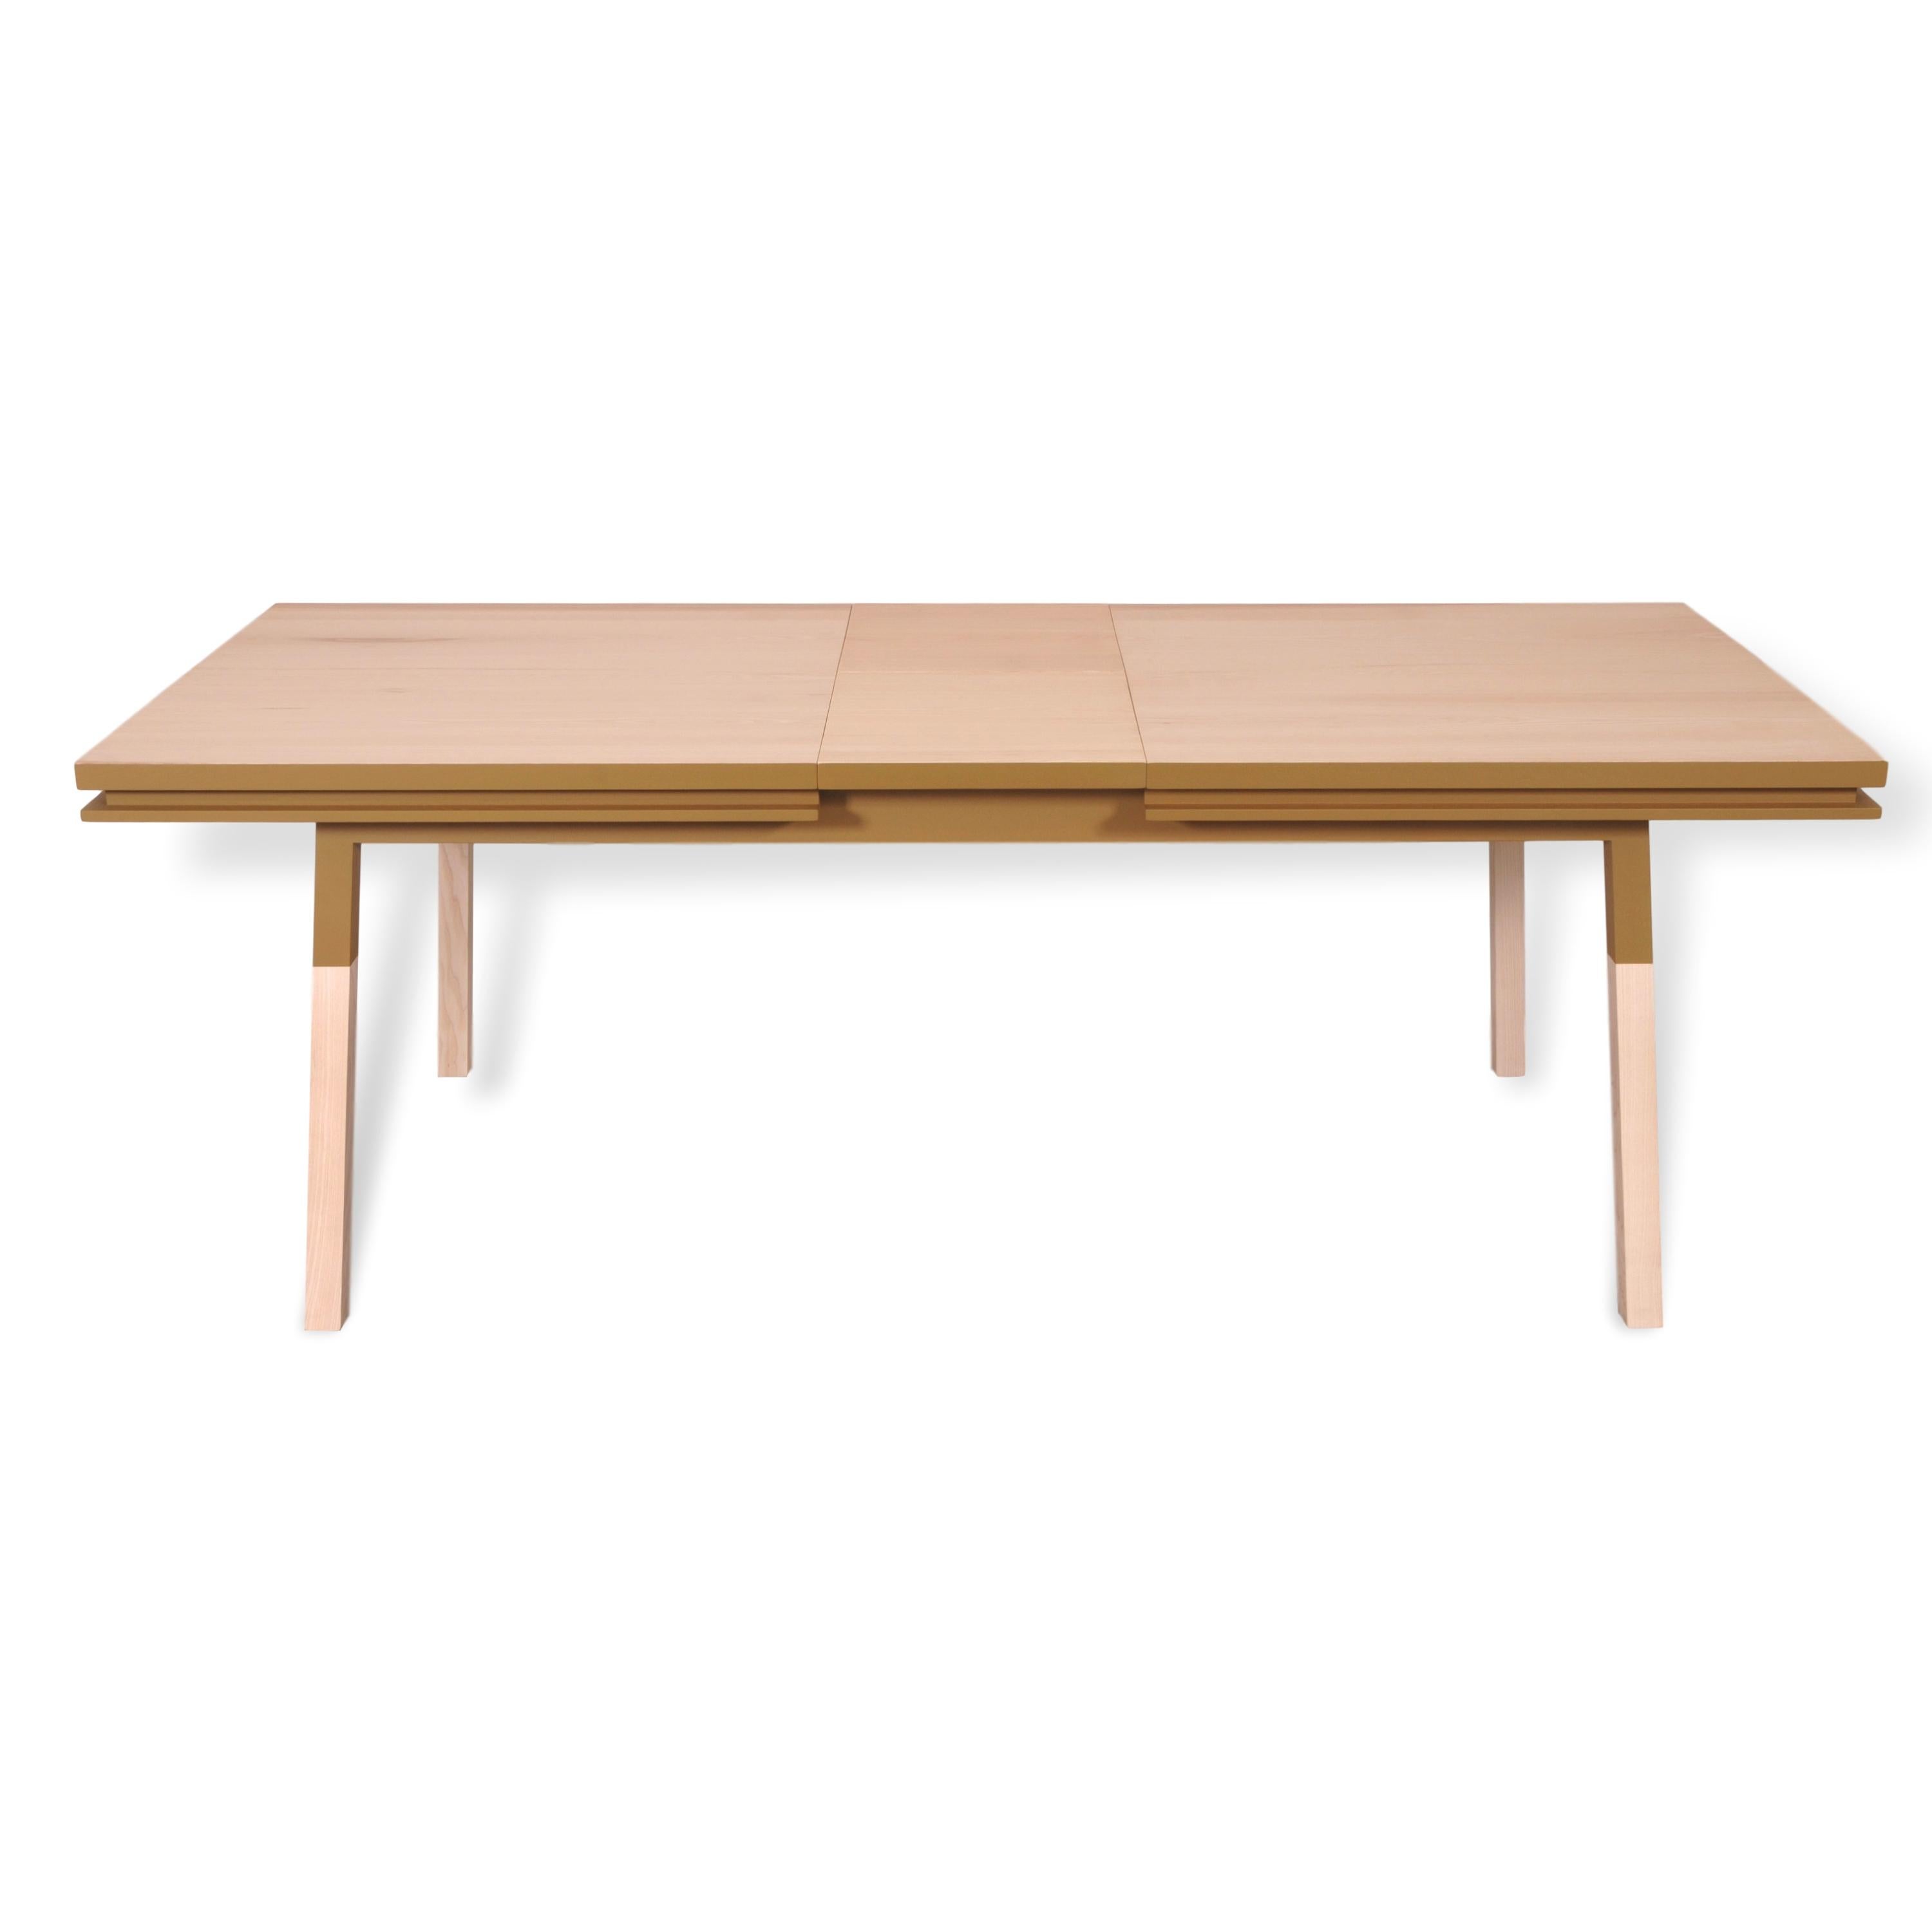 French Extensible Dining Table in Solid Wood, Scandinavian Design by E. Gizard, Paris For Sale